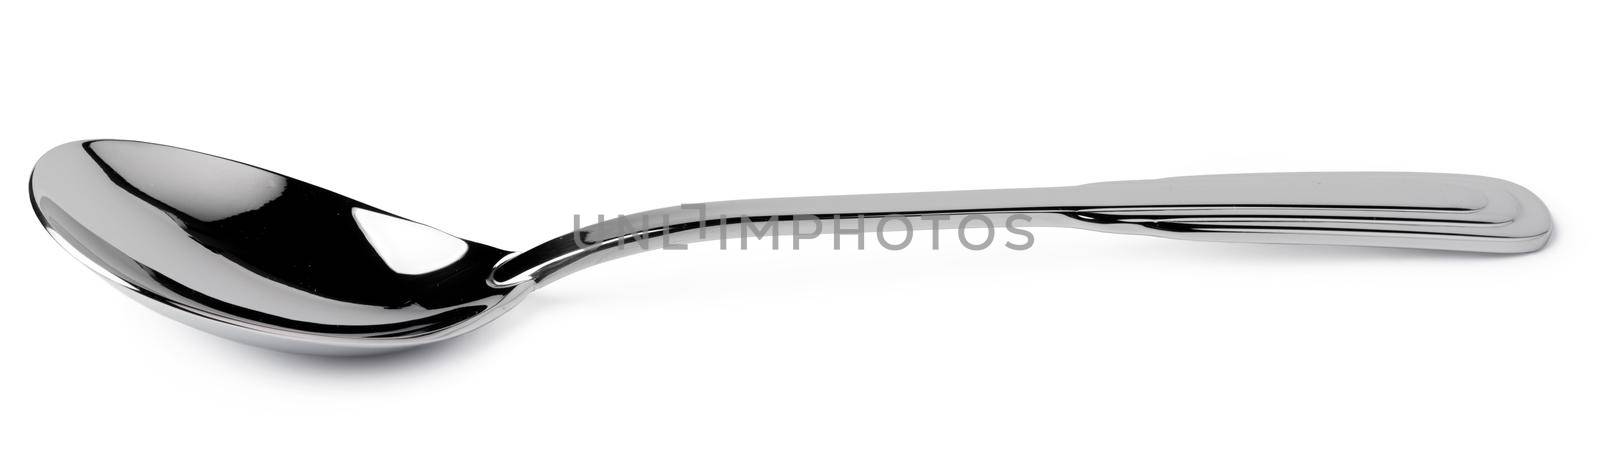 Metal steel spoon isolated on white background by Fabrikasimf